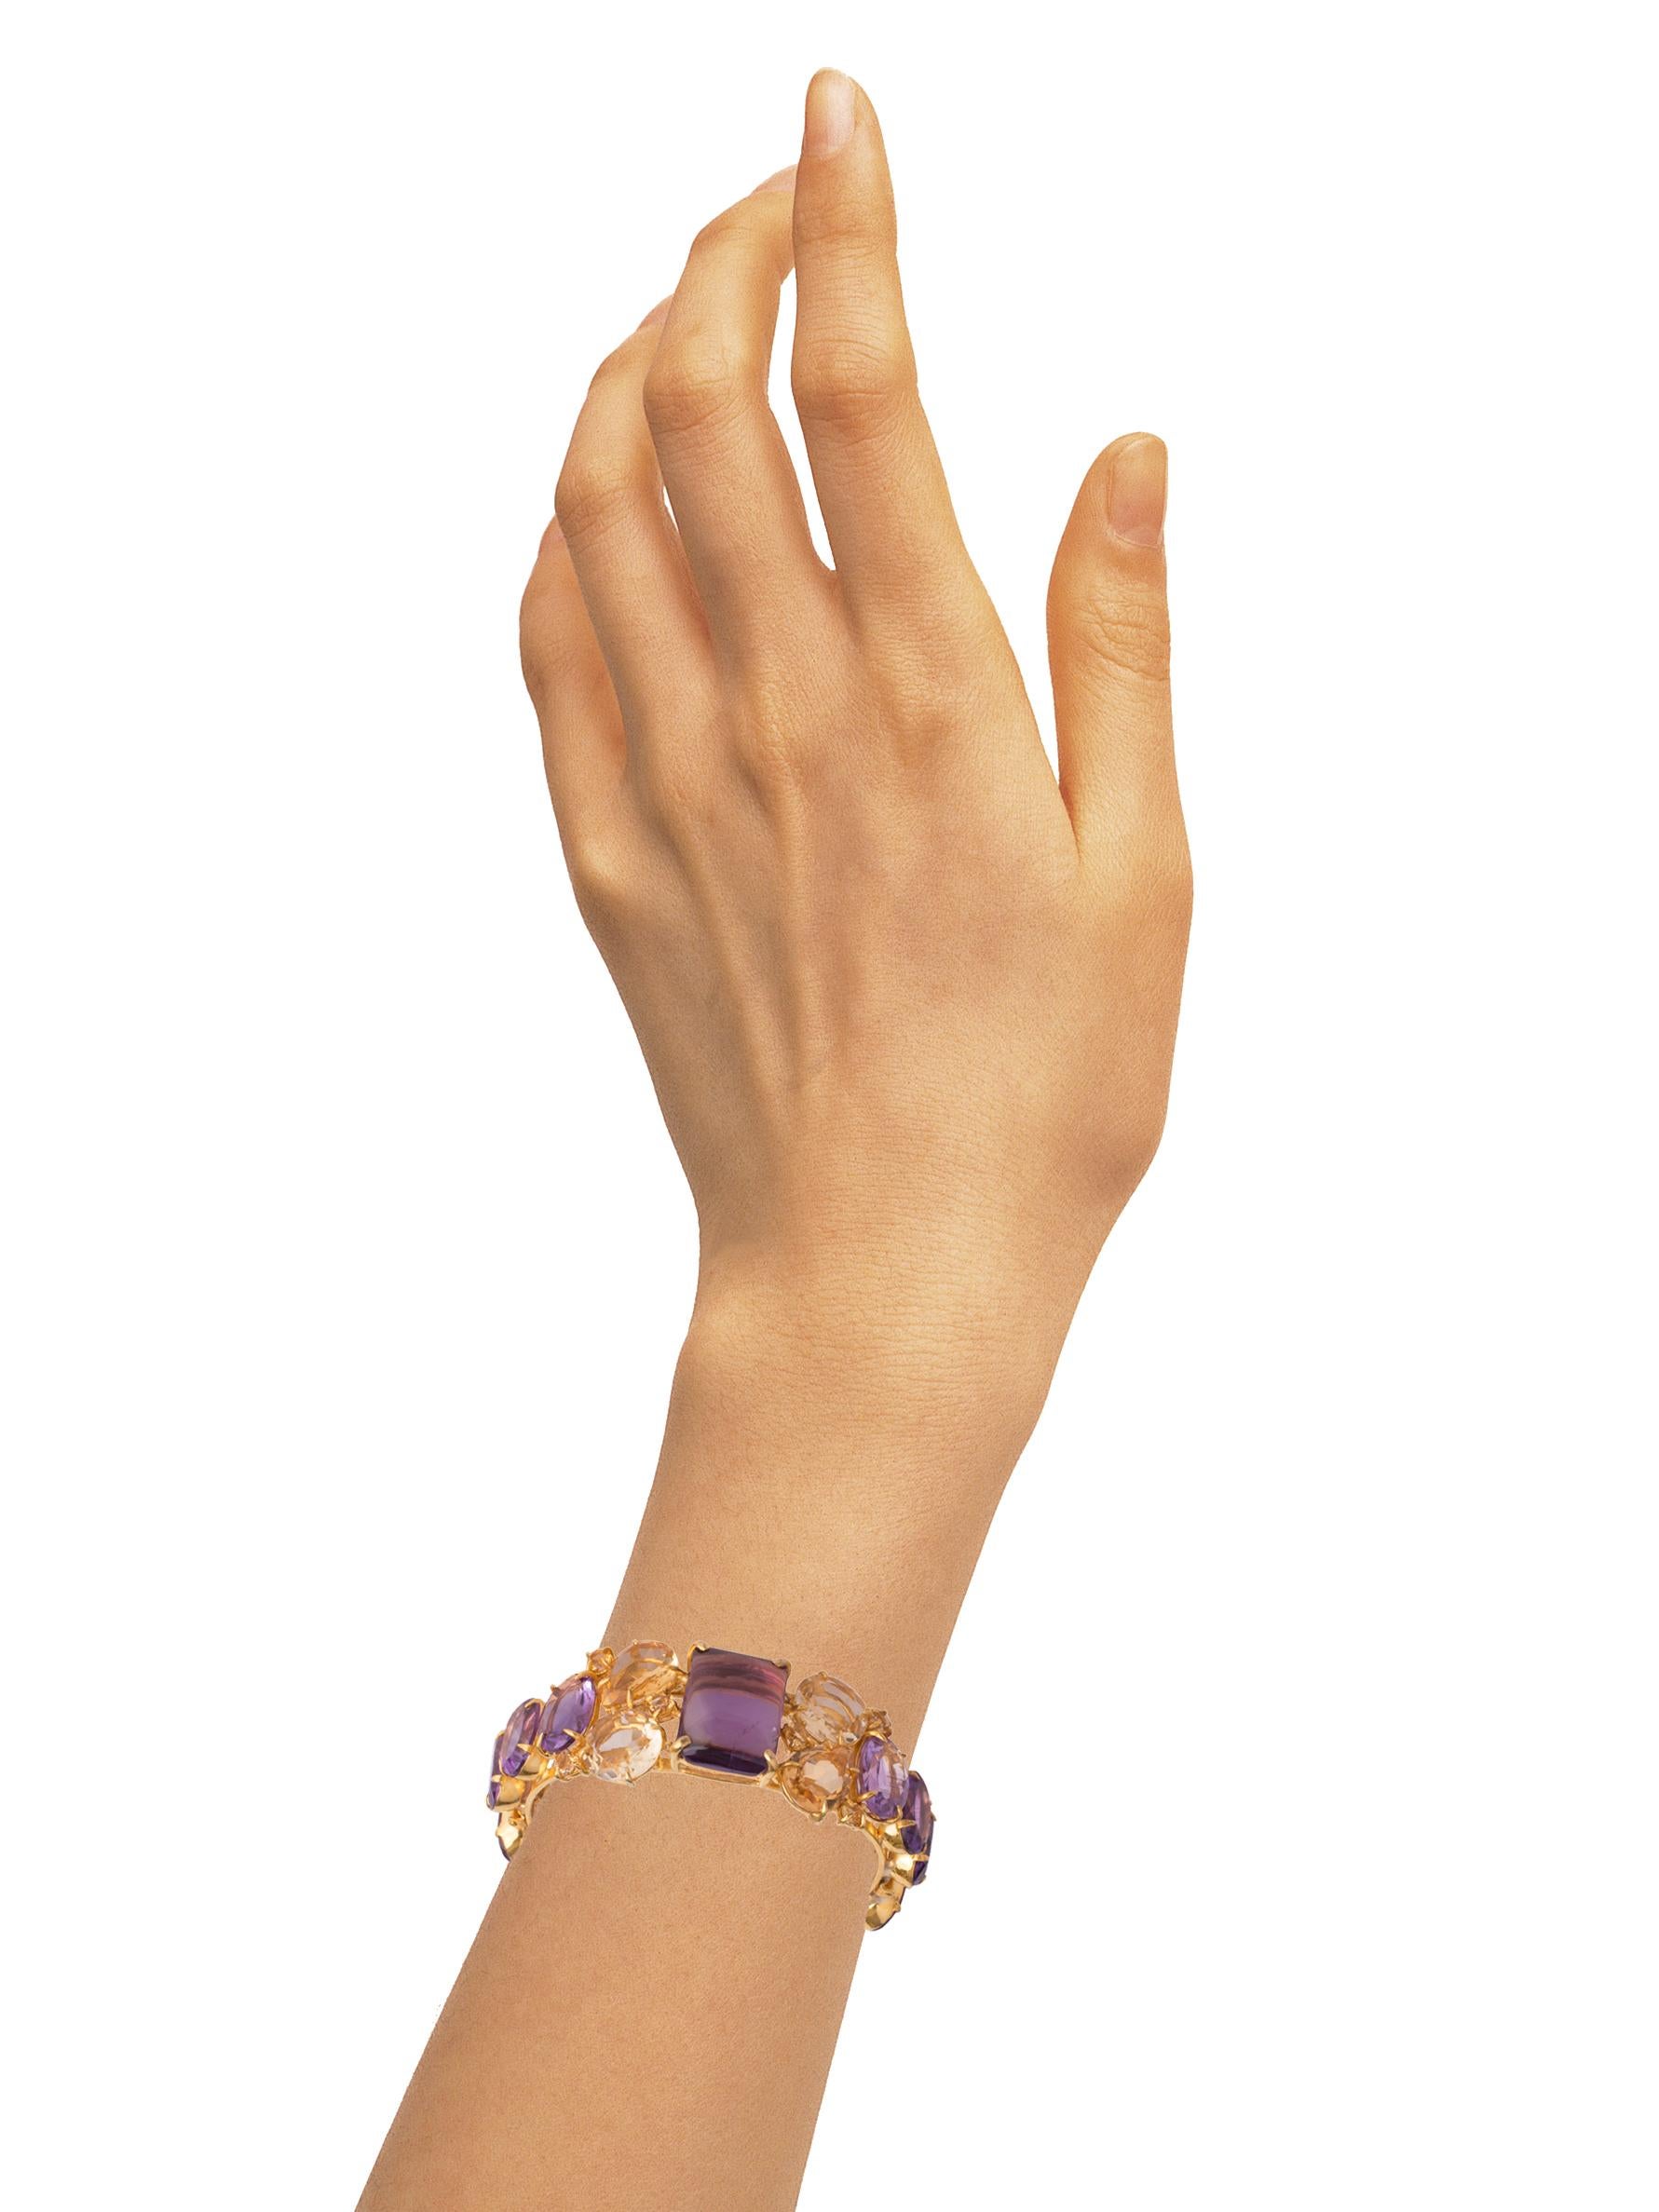 The Maya Cuff, fashioned from semi-precious stones, features an open-hinged design. Its uniqueness lies in the vintage-inspired aesthetic, adorned with contrasting colorful stones.

SKU: CF-CL-14AM
Stones: Citrine & Amethyst
Material: 14K Gold